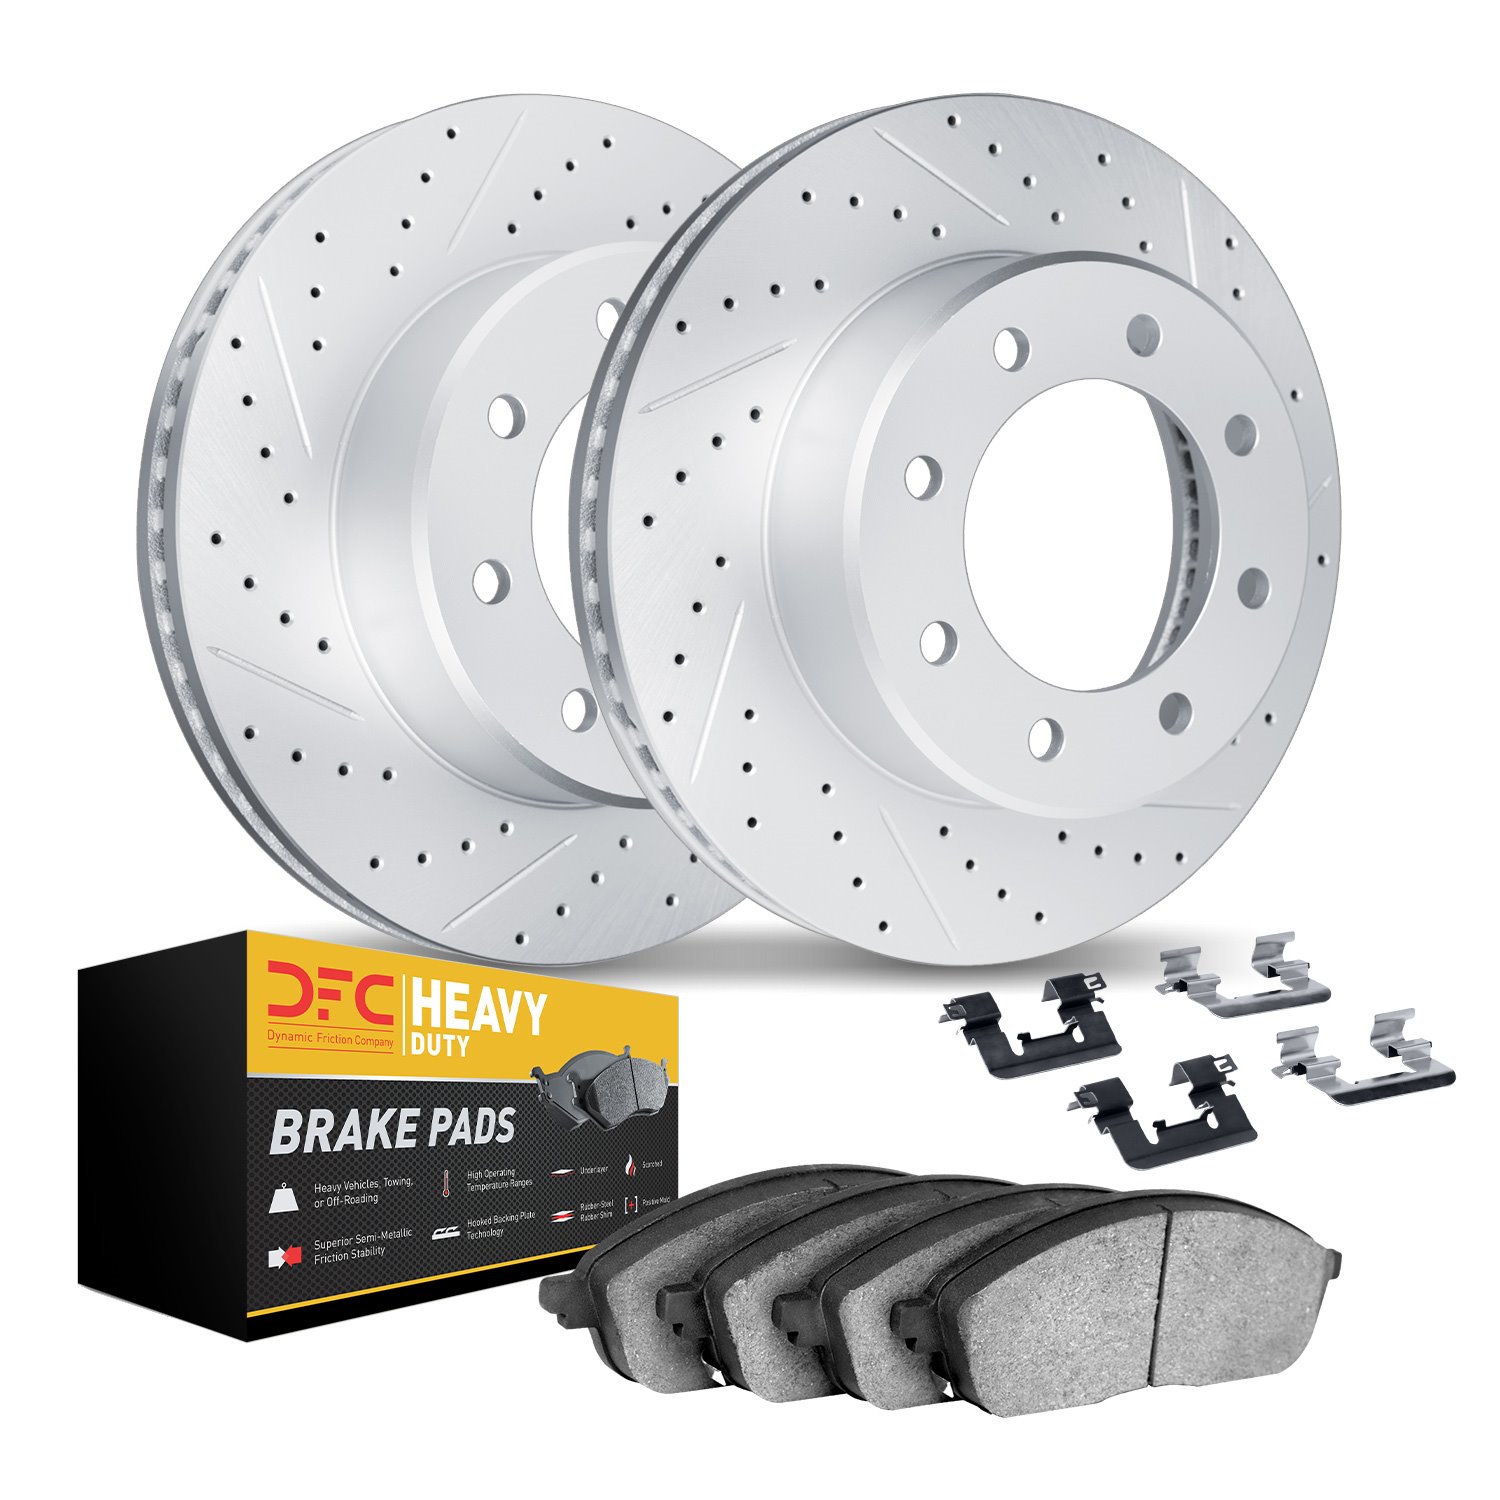 2212-99159 Geoperformance Drilled/Slotted Rotors w/Heavy-Duty Pads Kit & Hardware, 2005-2007 Ford/Lincoln/Mercury/Mazda, Positio